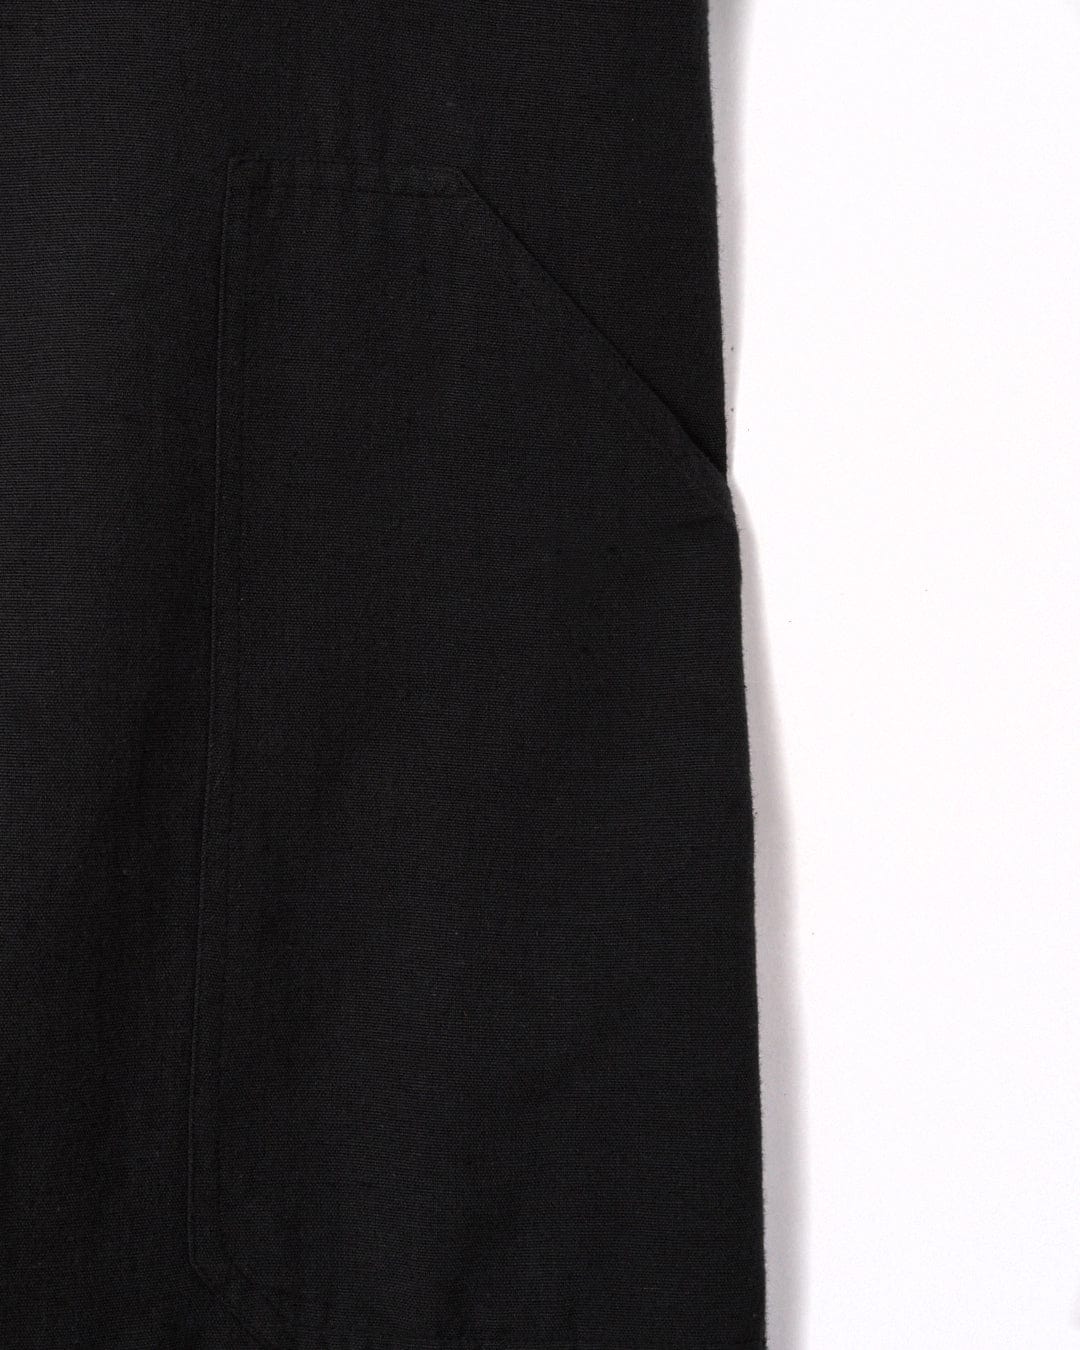 Close-up view of a black cotton fabric with a stitched pocket on the left side. The background is white. This fabric is from the Nancy - Womens Dungarees - Dark Grey by Saltrock.